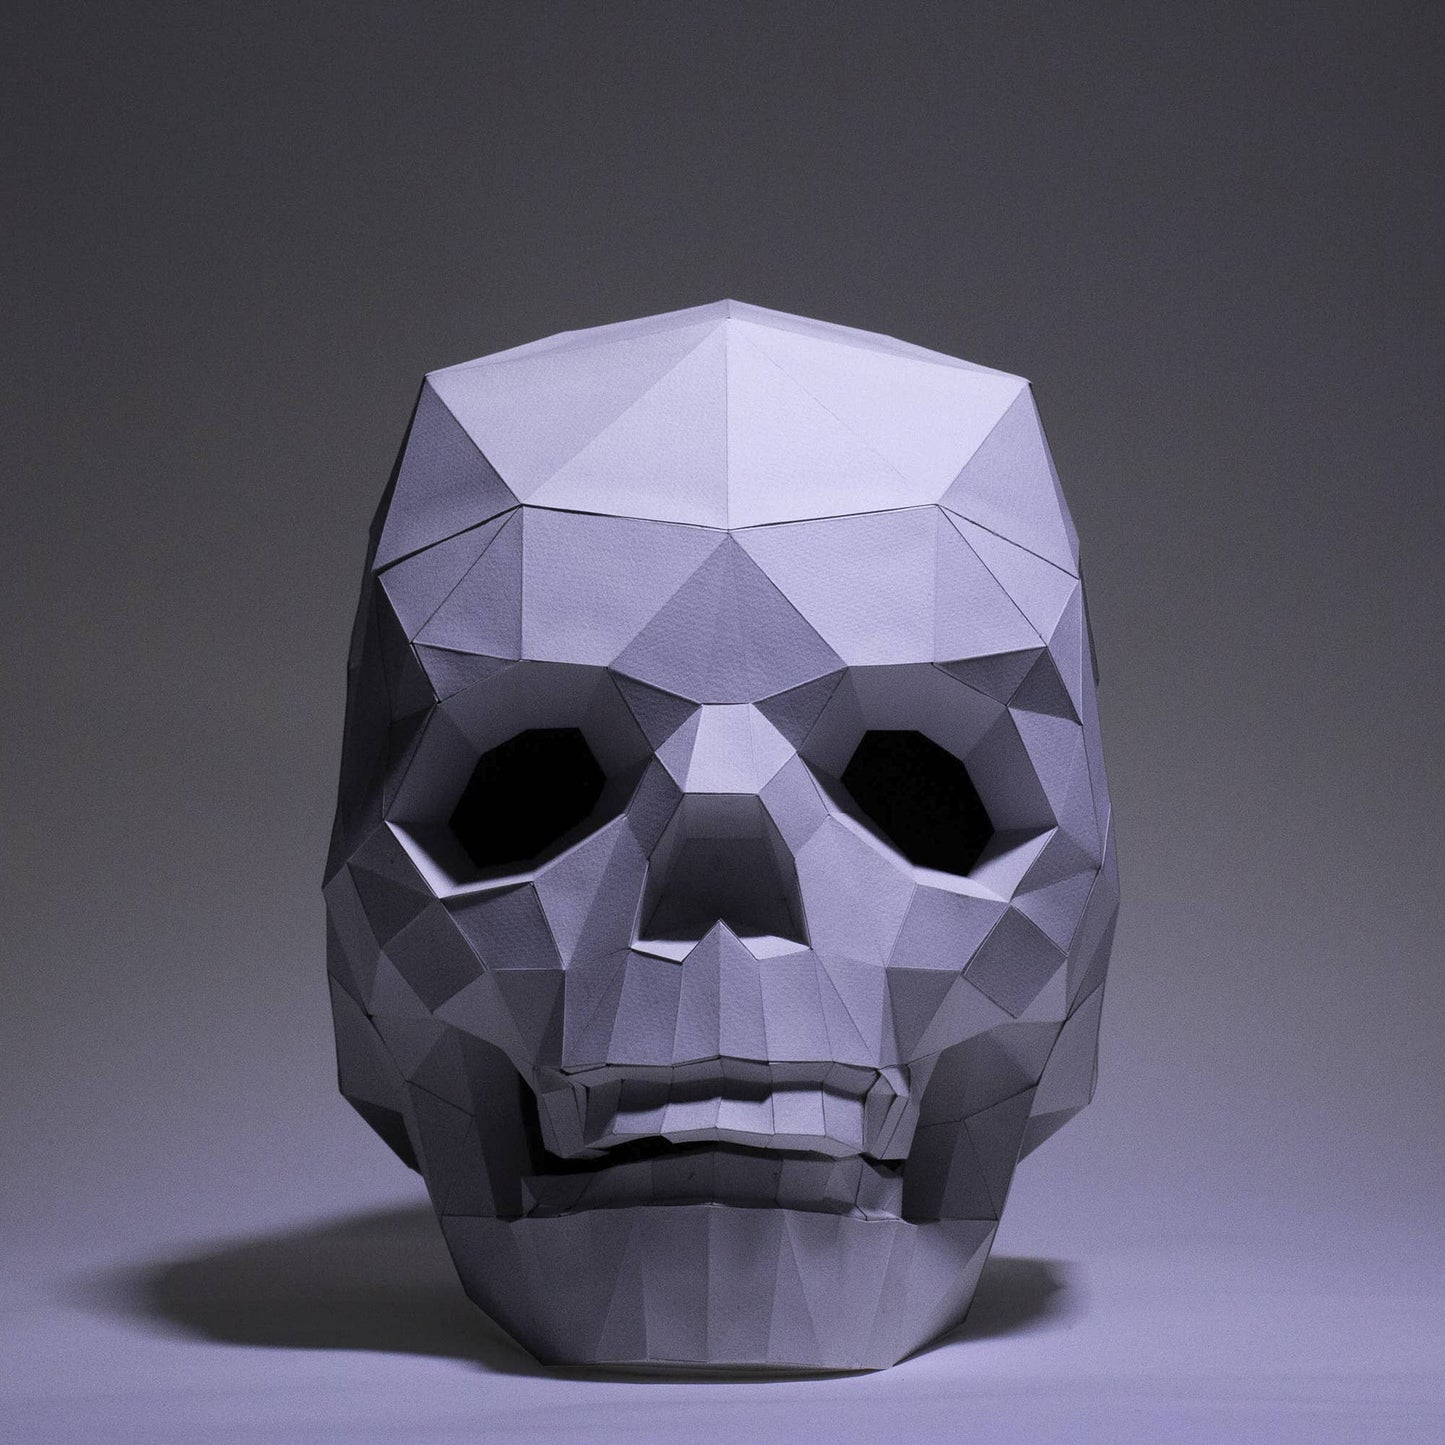 PAPERCRAFT WORLD - Low Poly Skull PaperCraft Origami Model